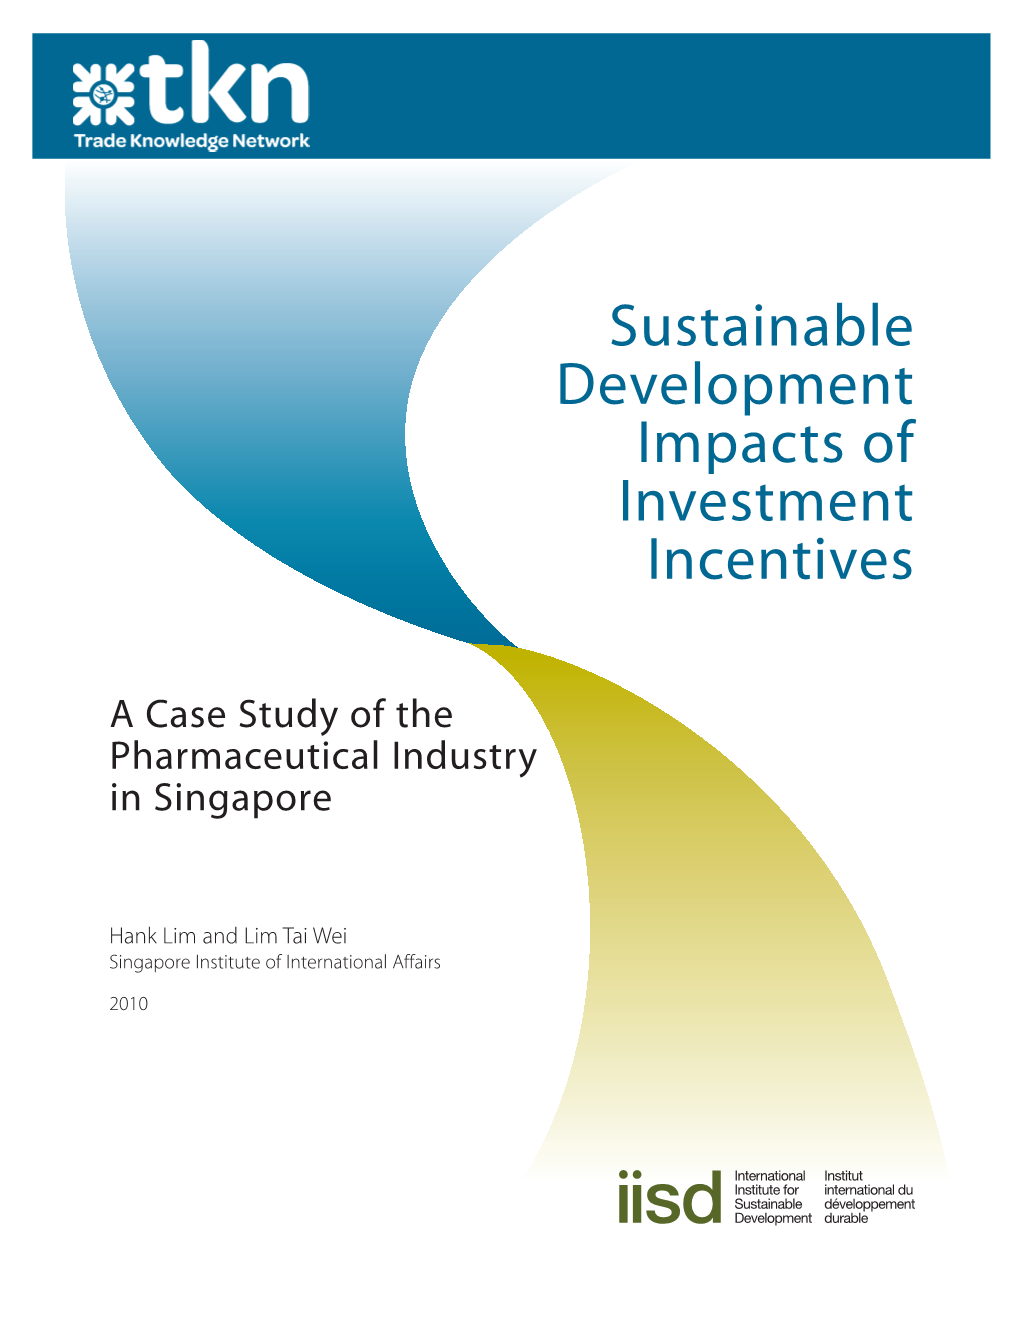 A Case Study of the Pharmaceutical Industry in Singapore